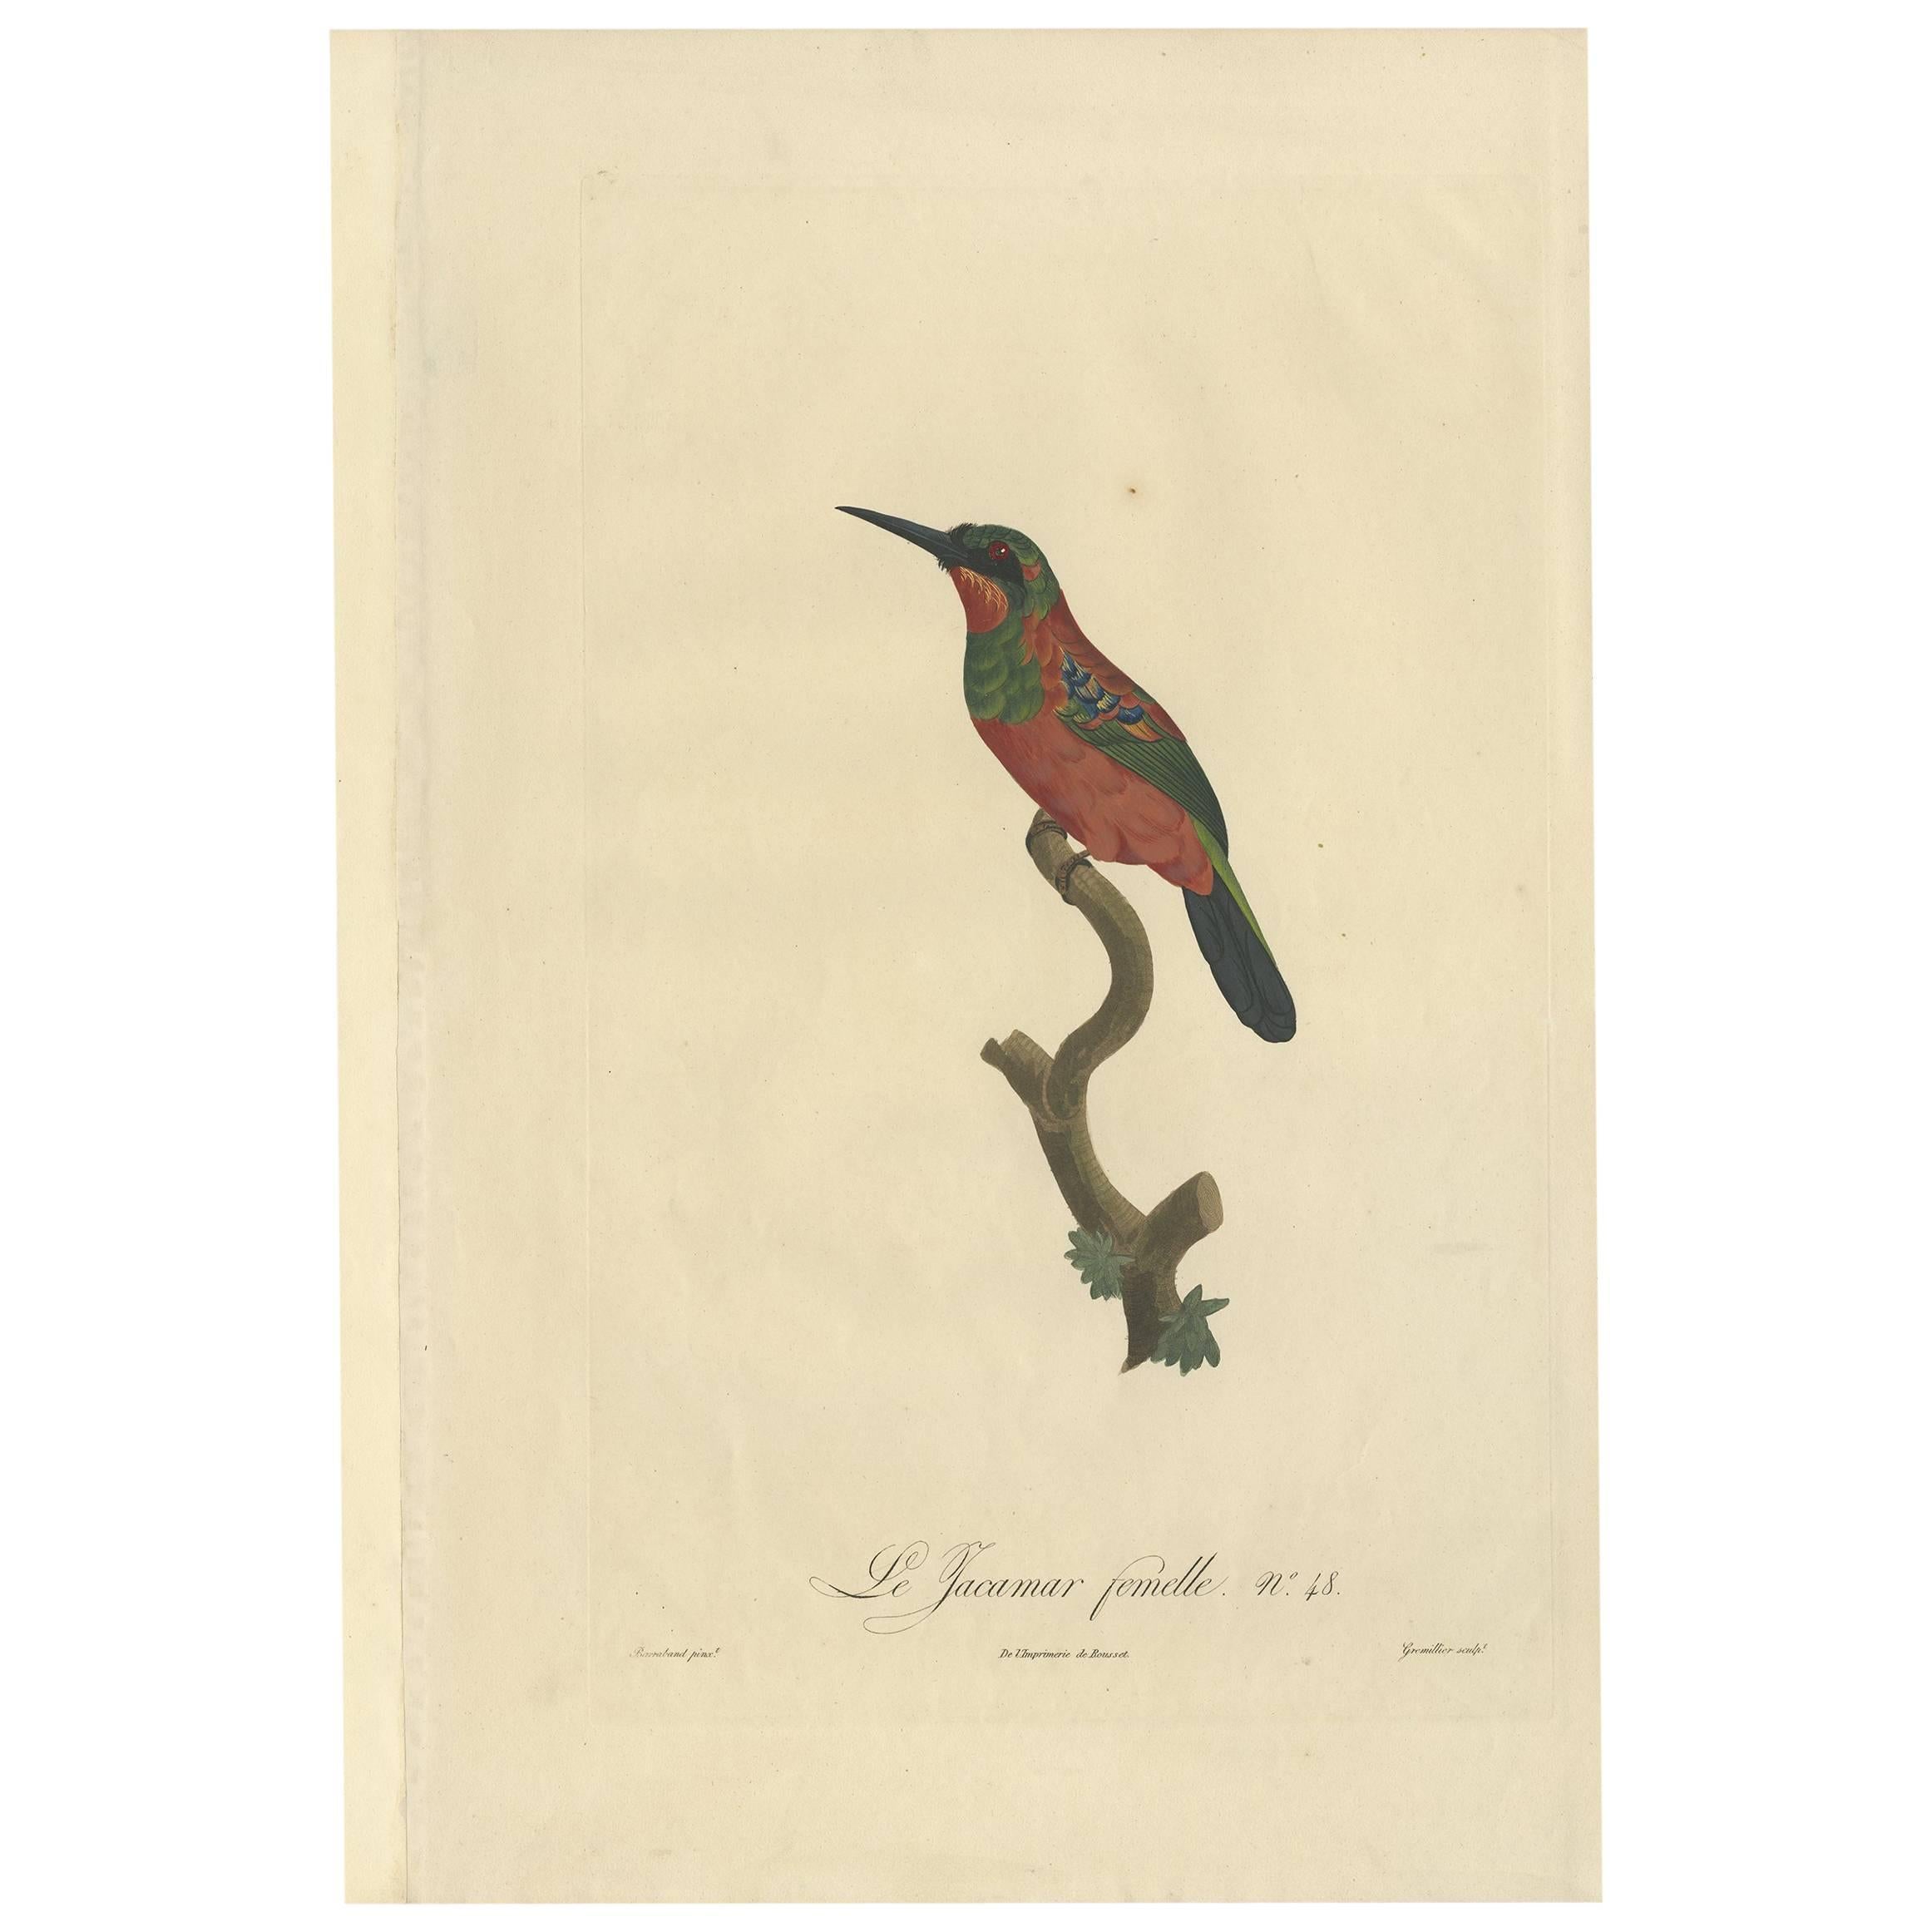 Stunning Hand-Colored Antique Bird Print of a Female Jacamar by Barraband, c1805 For Sale